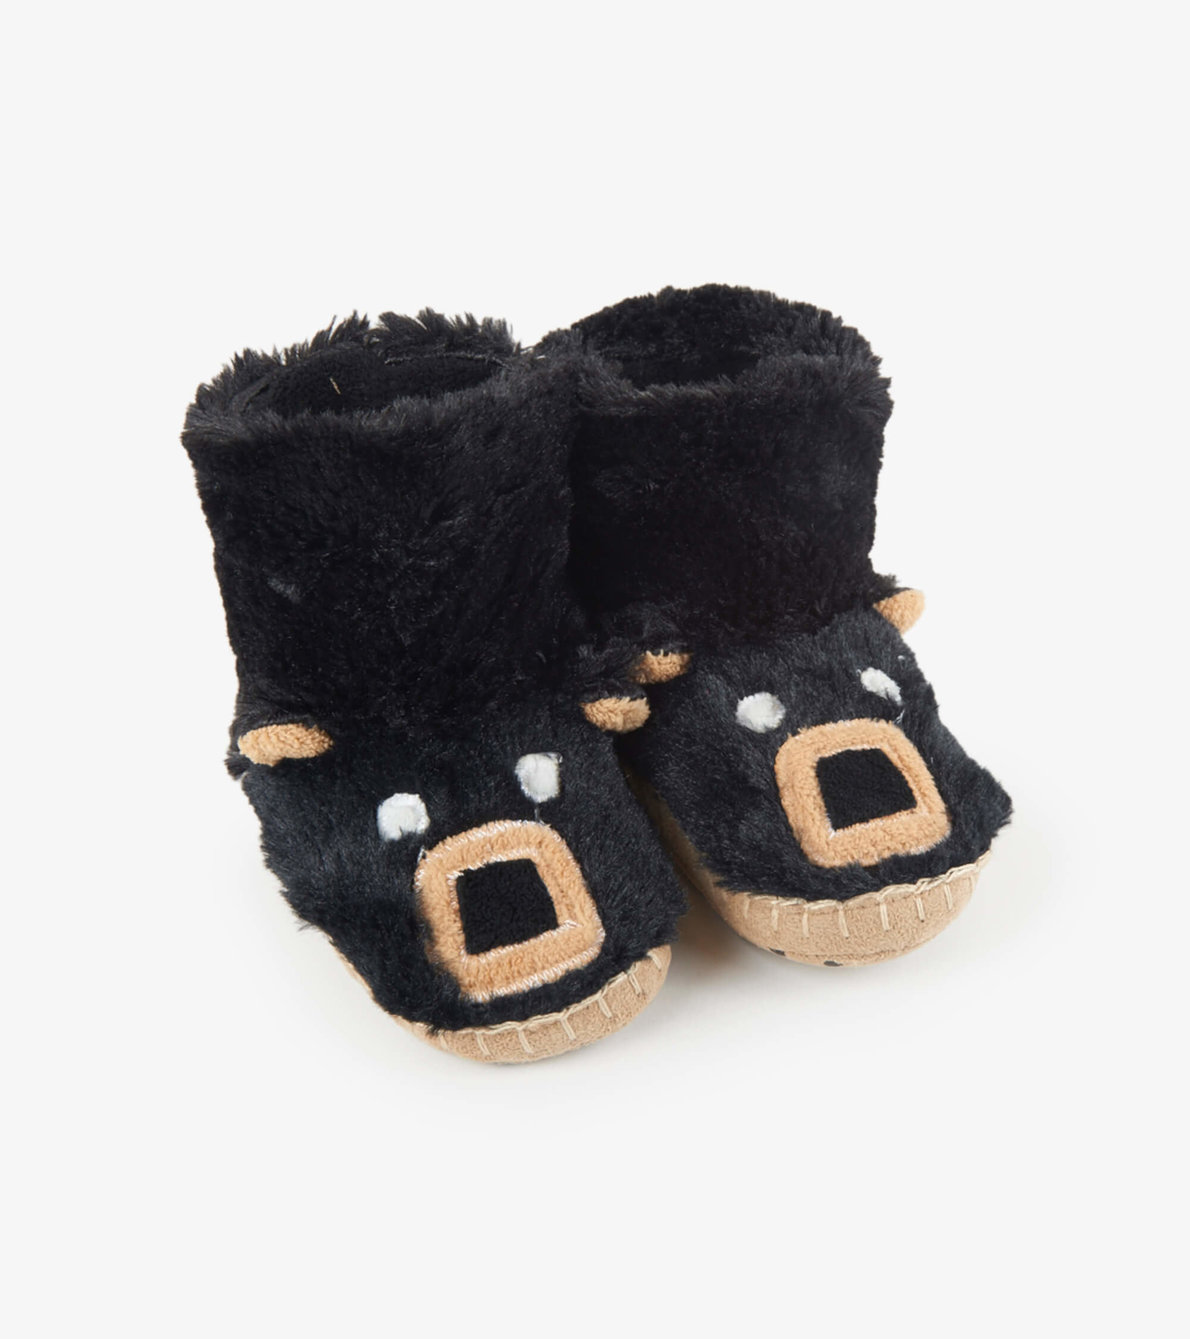 View larger image of Black Bear Kids Fuzzy Slouch Slippers